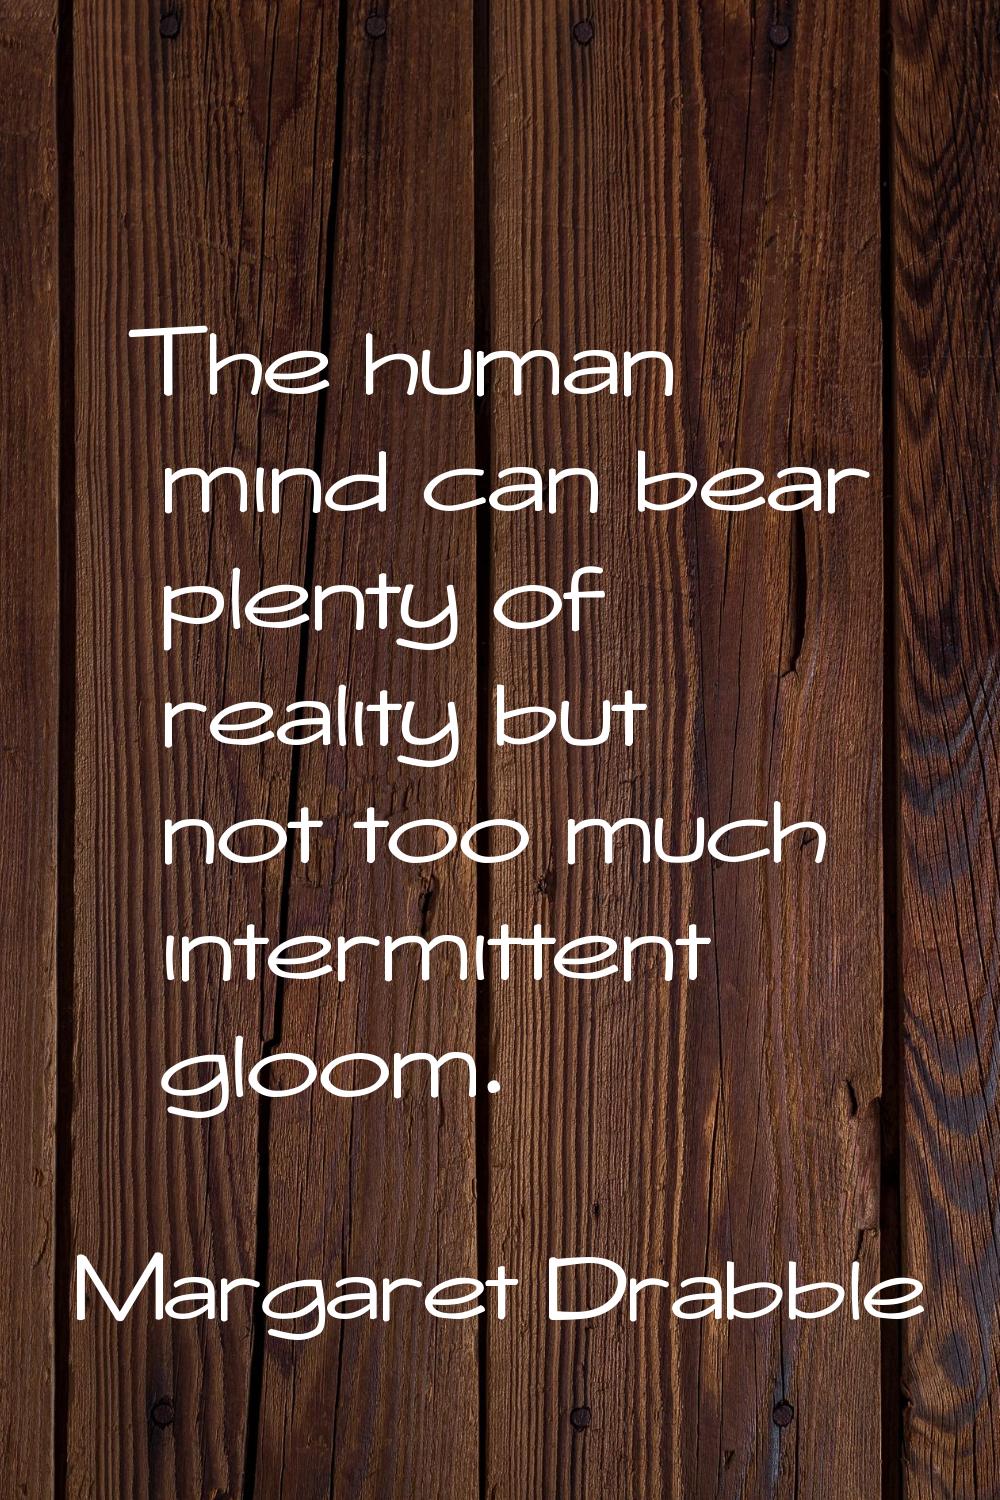 The human mind can bear plenty of reality but not too much intermittent gloom.